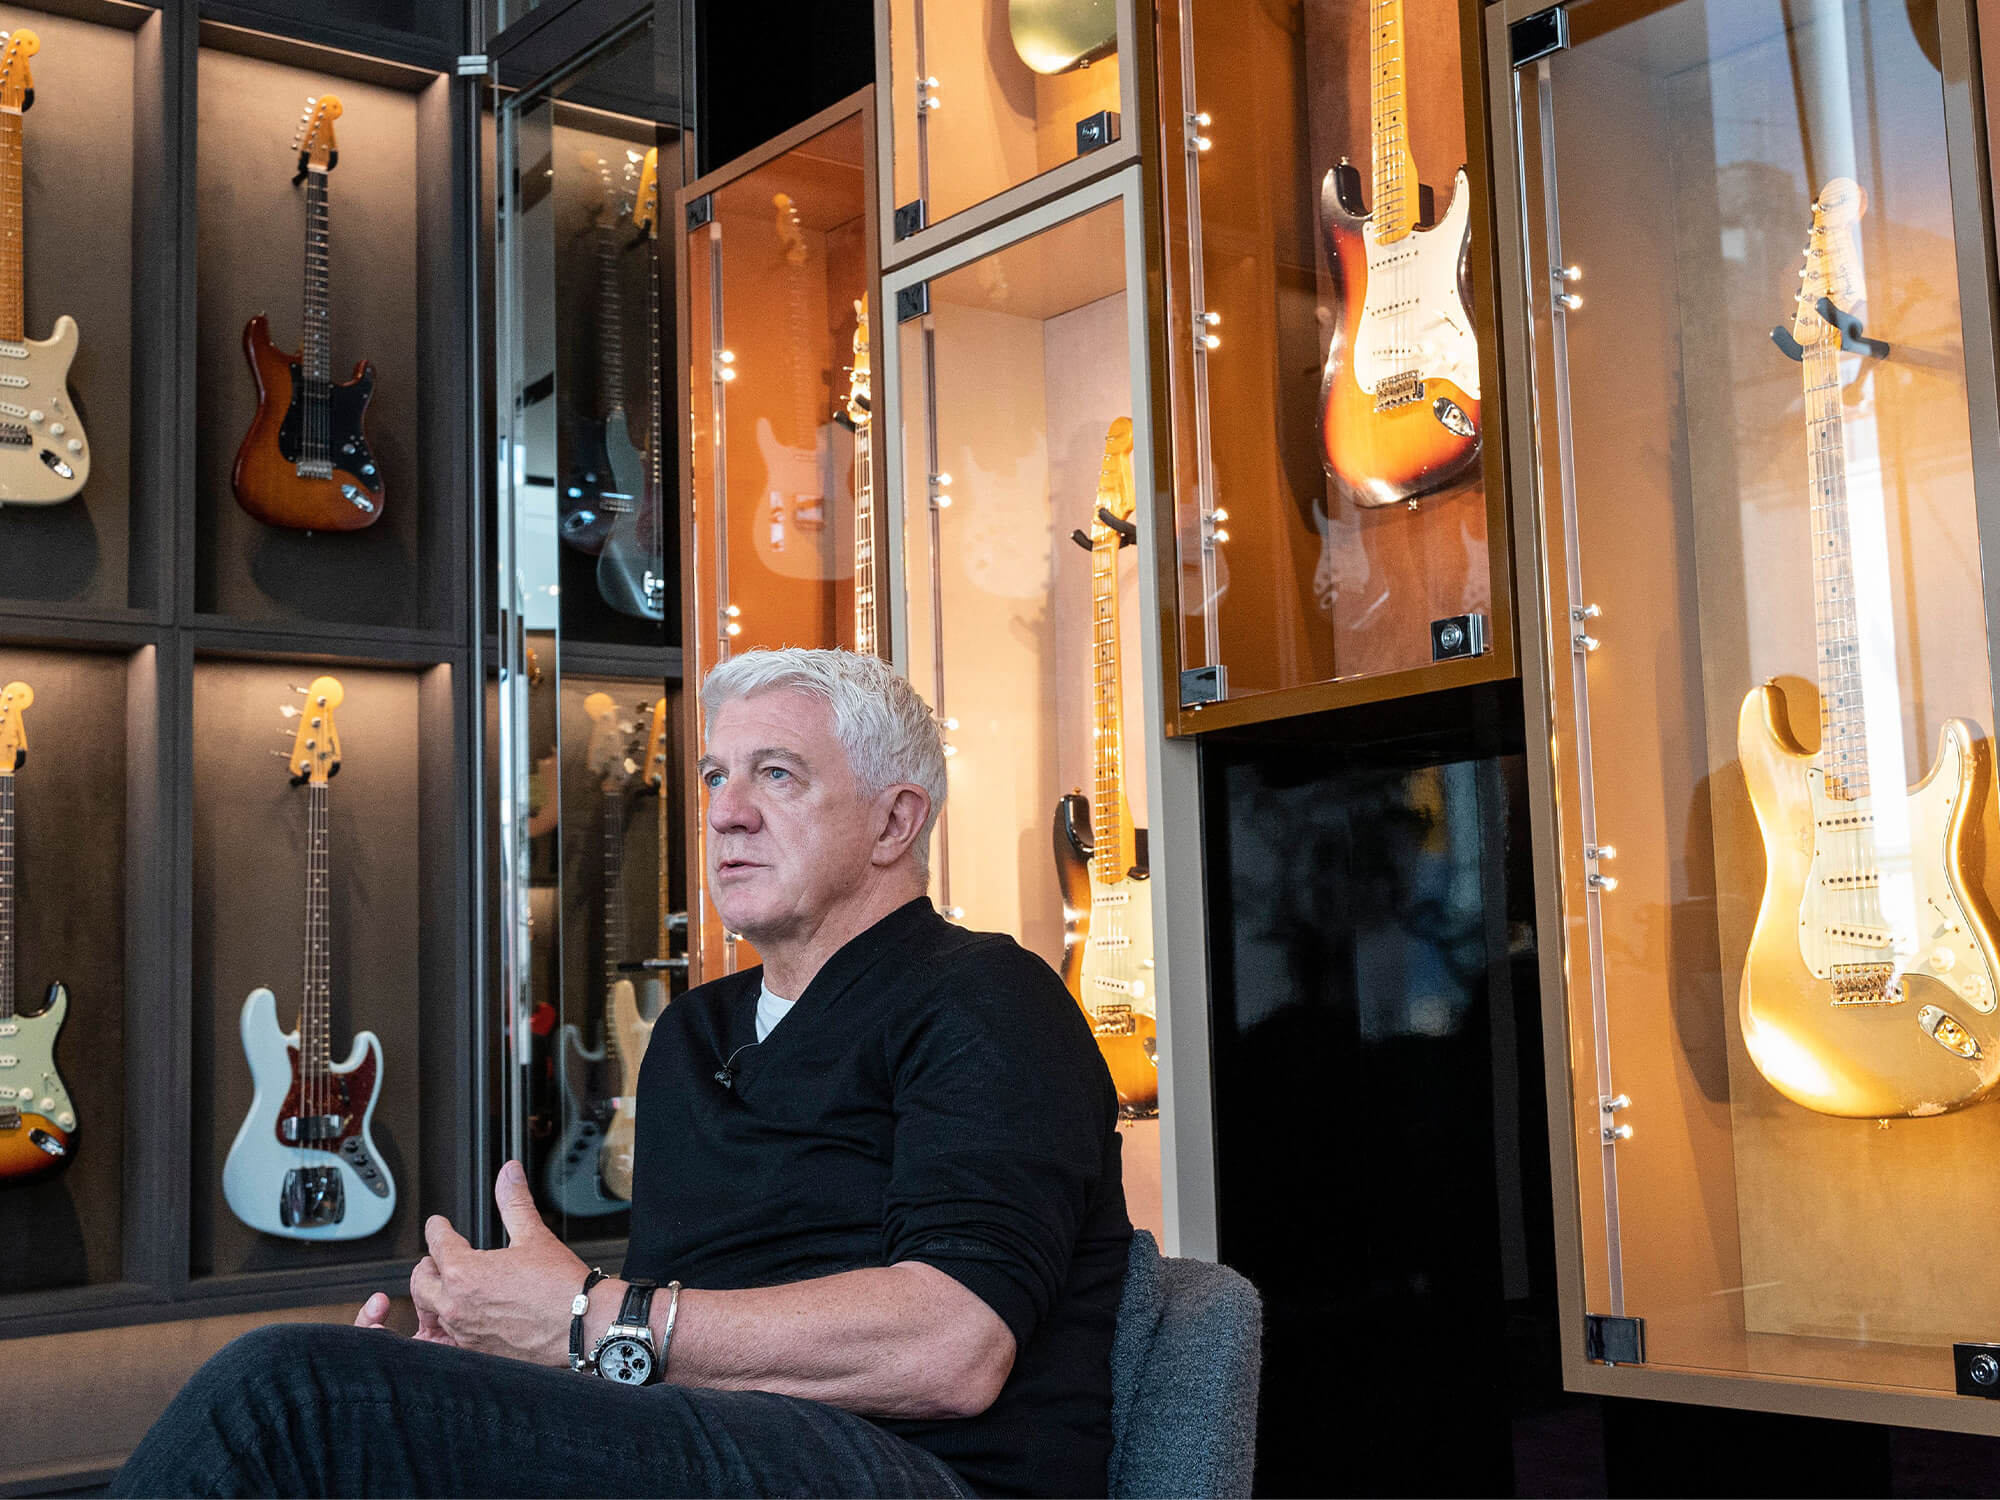 Andy Mooney sitting in a chair in front of glass cases filled with Fender guitars. He is engaged in conversation with somebody not in the shot. He has white hair and wears a dark coloured top.